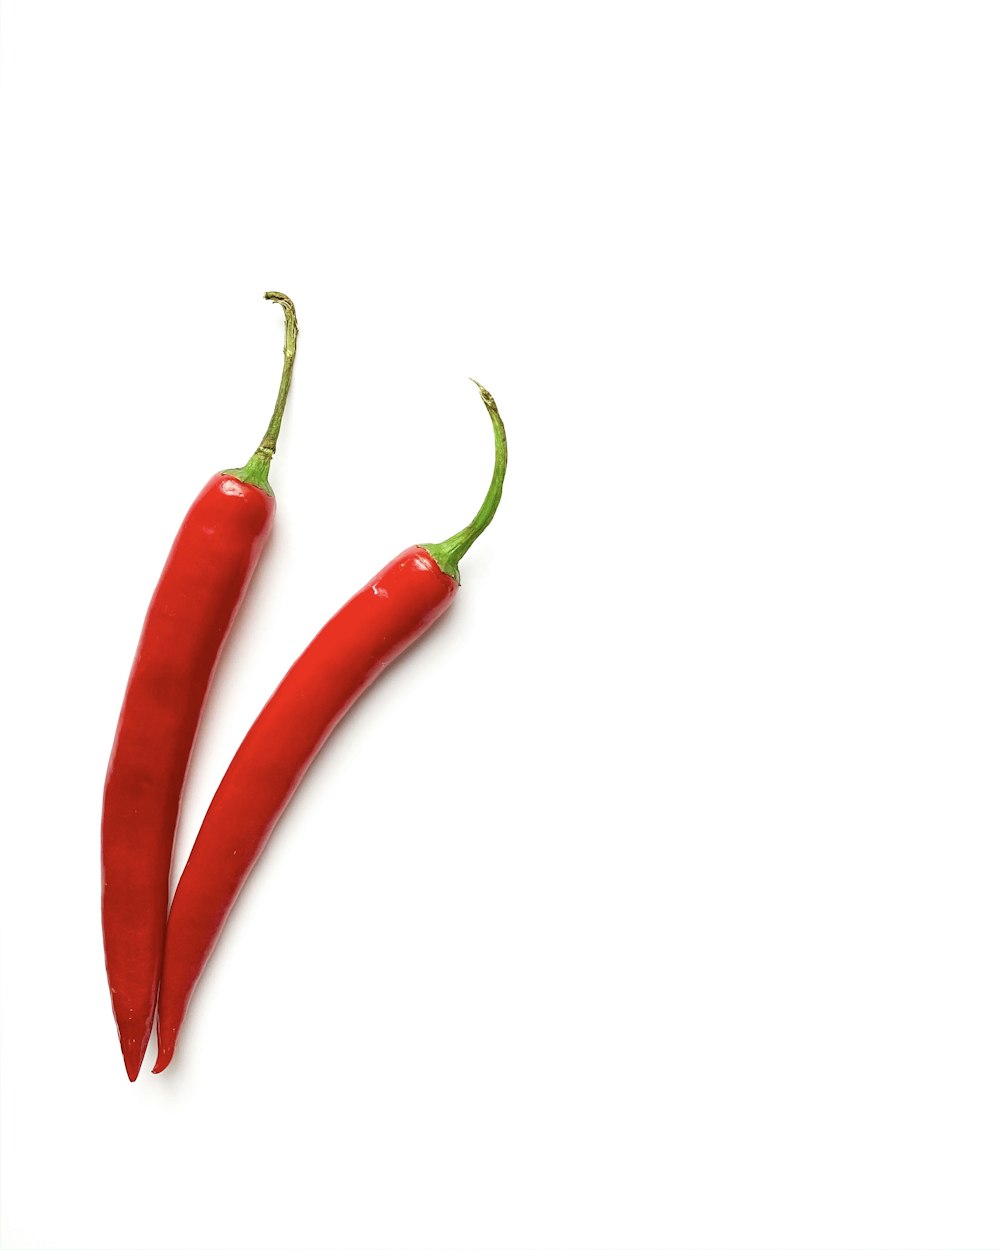 100 Pepper Pictures Hd Download Free Images Stock Photos On Unsplash